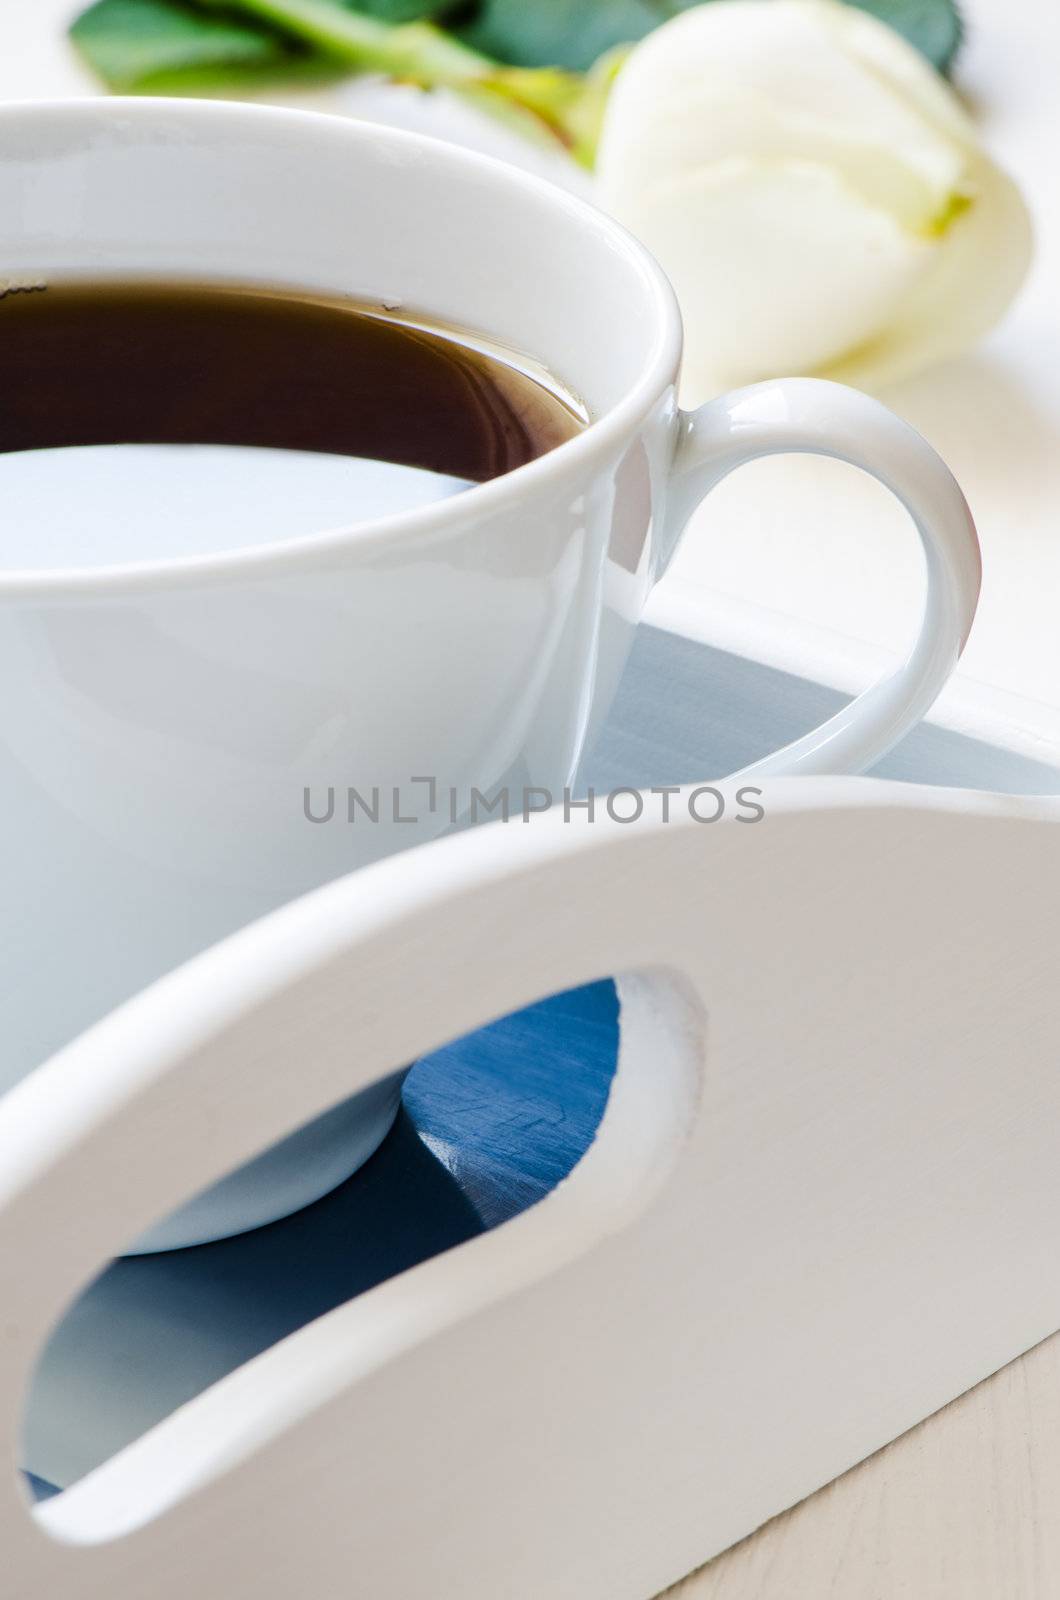 Cup of coffee on a tray with flower on background